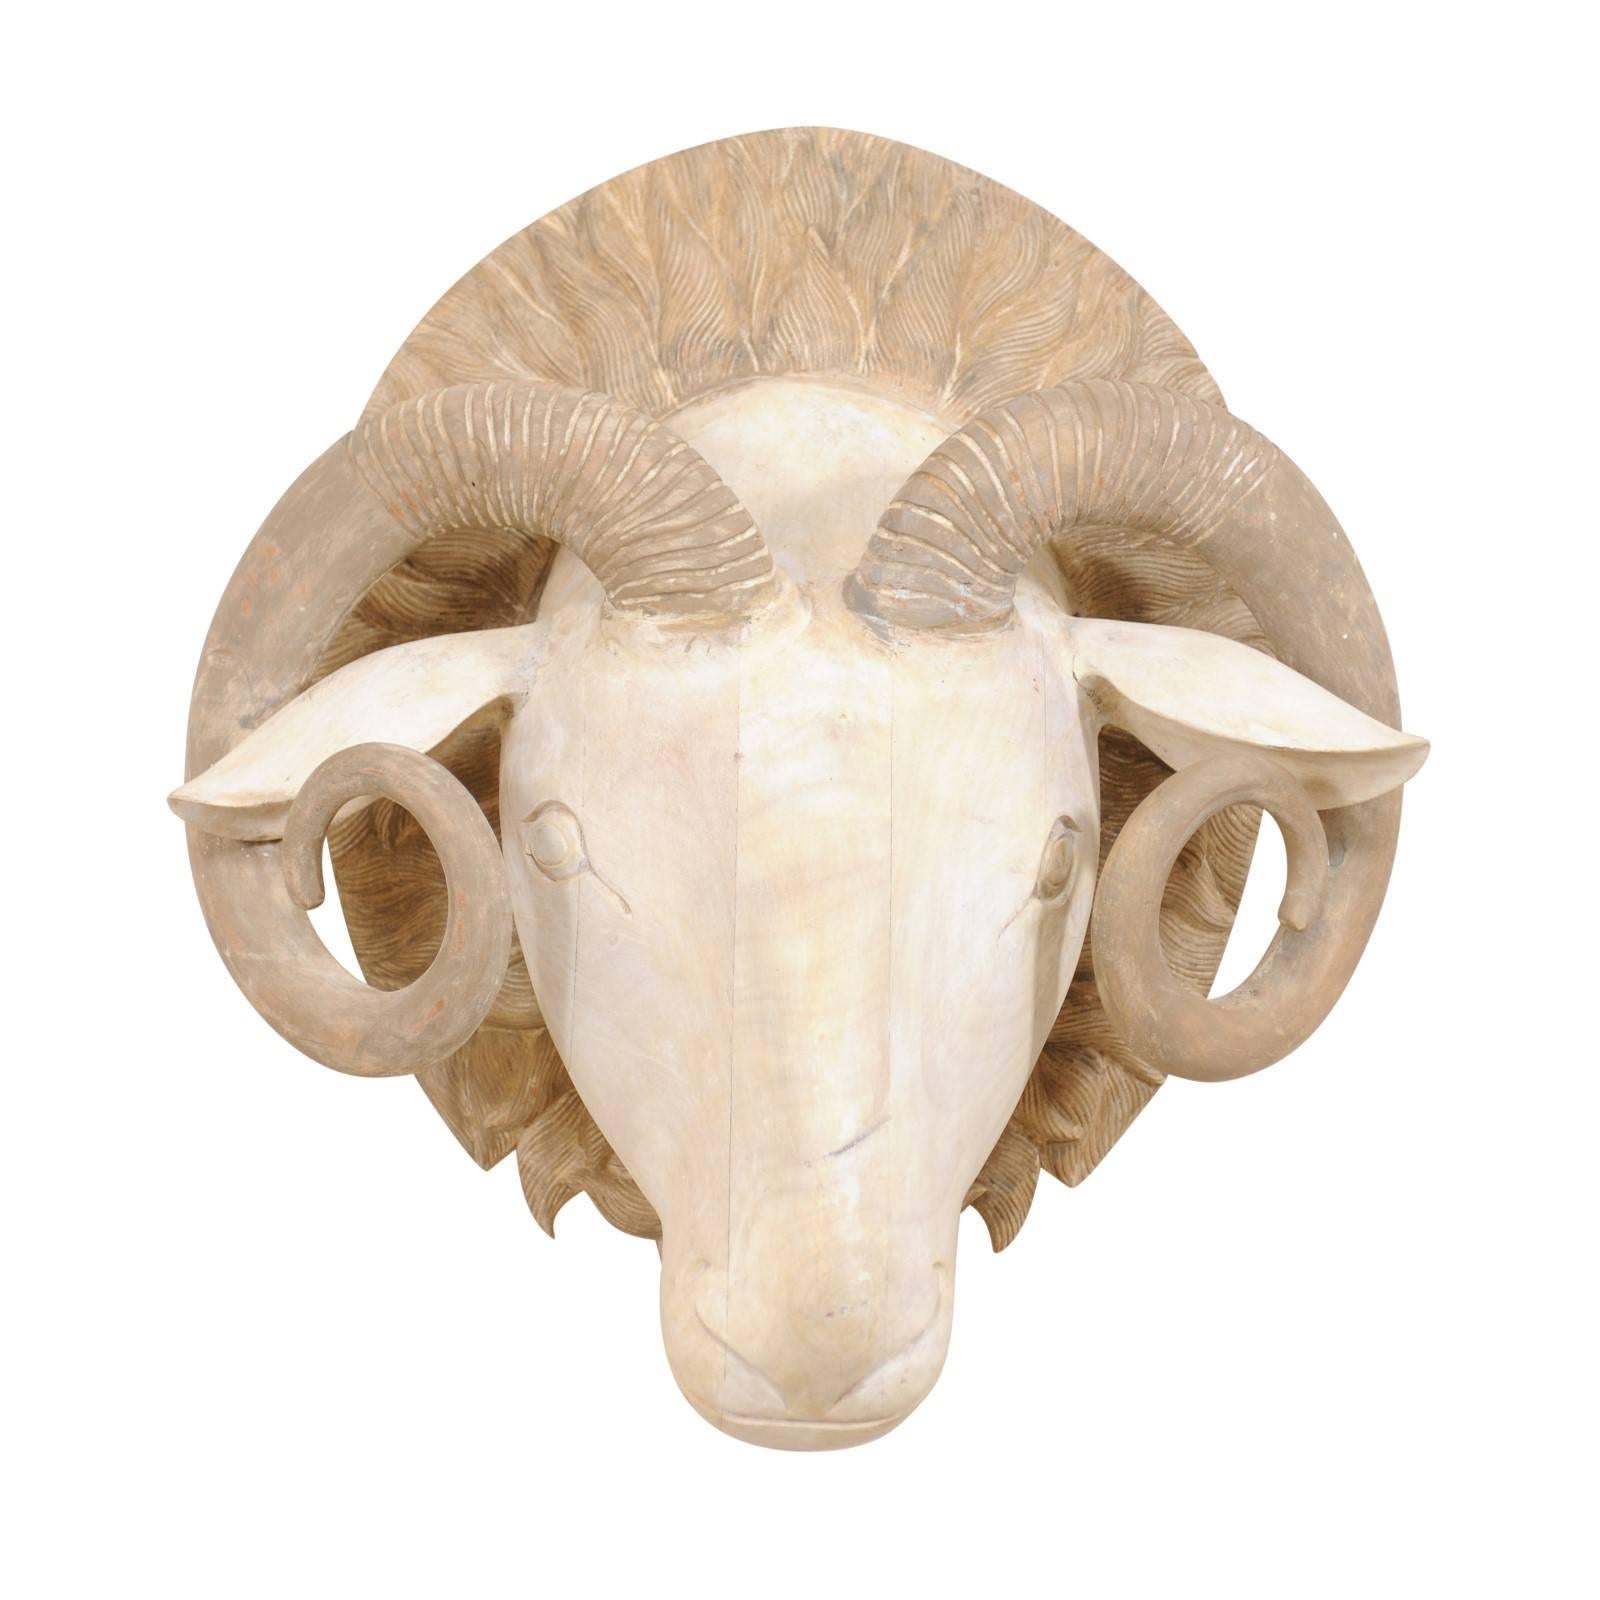 Carved and Painted Wood Ram's Head Wall-Mounted Sculpture